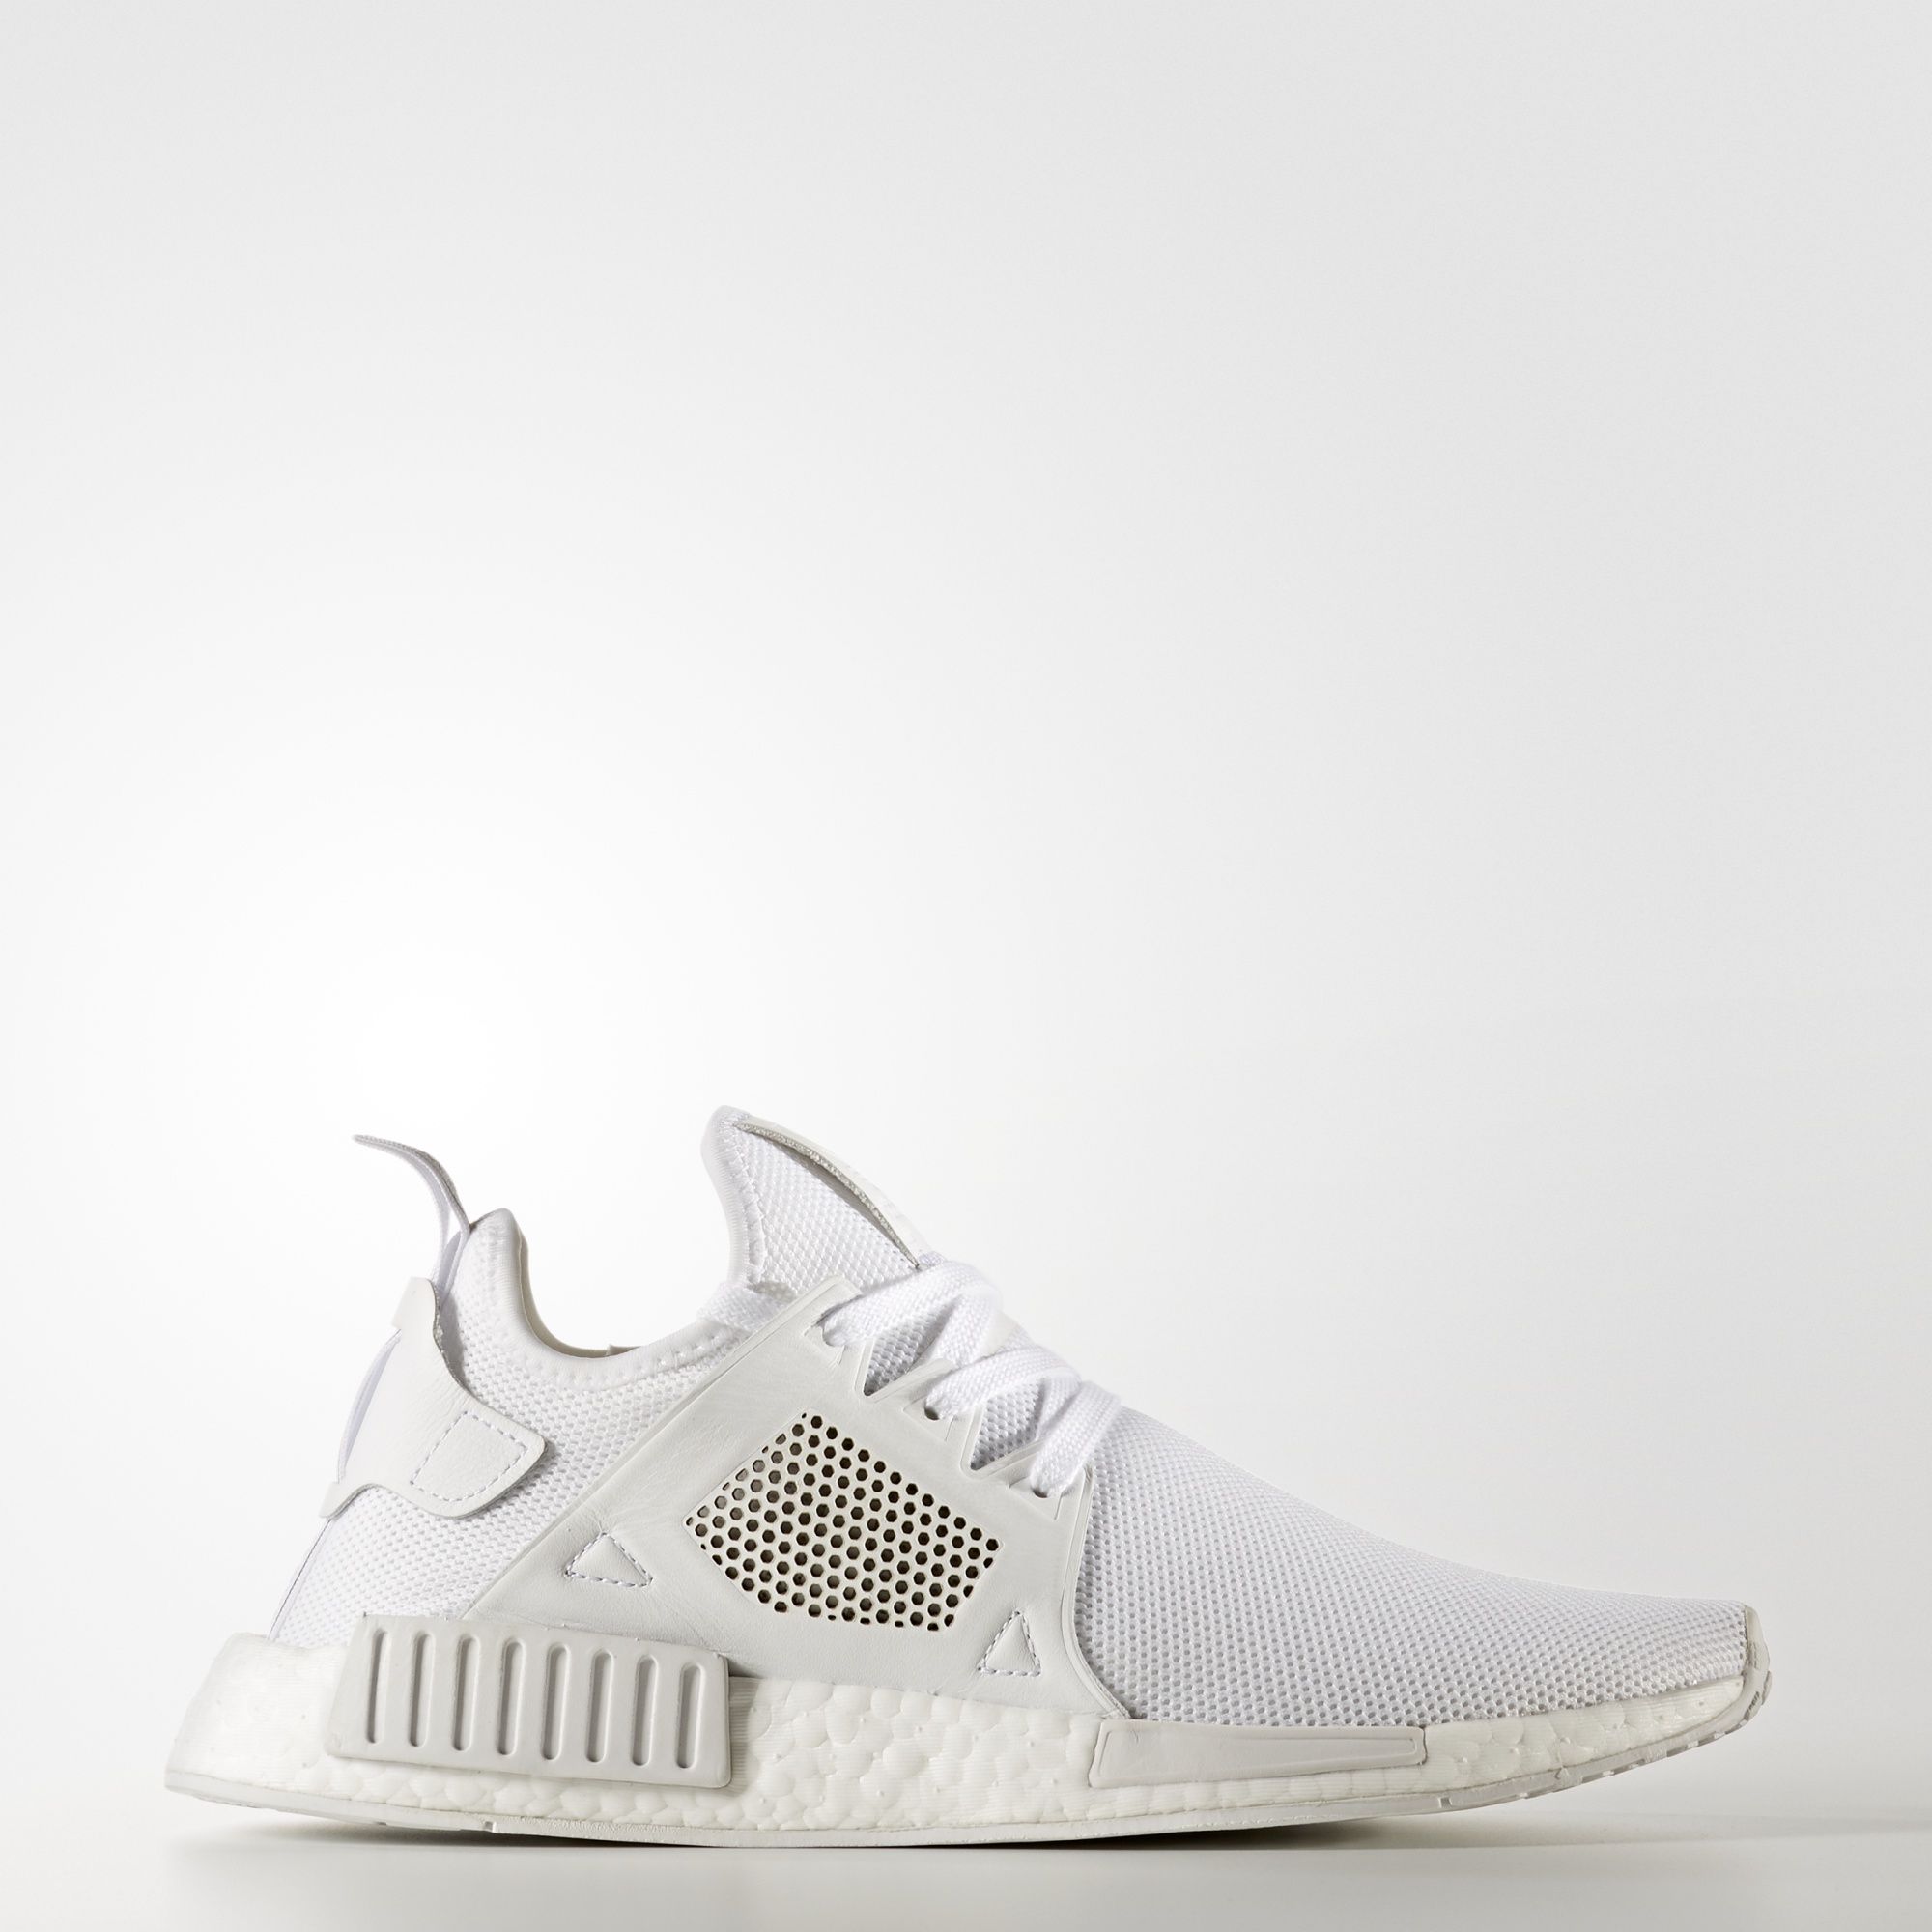 adidas-nmd_xr1-triple-white-leather-cage-2